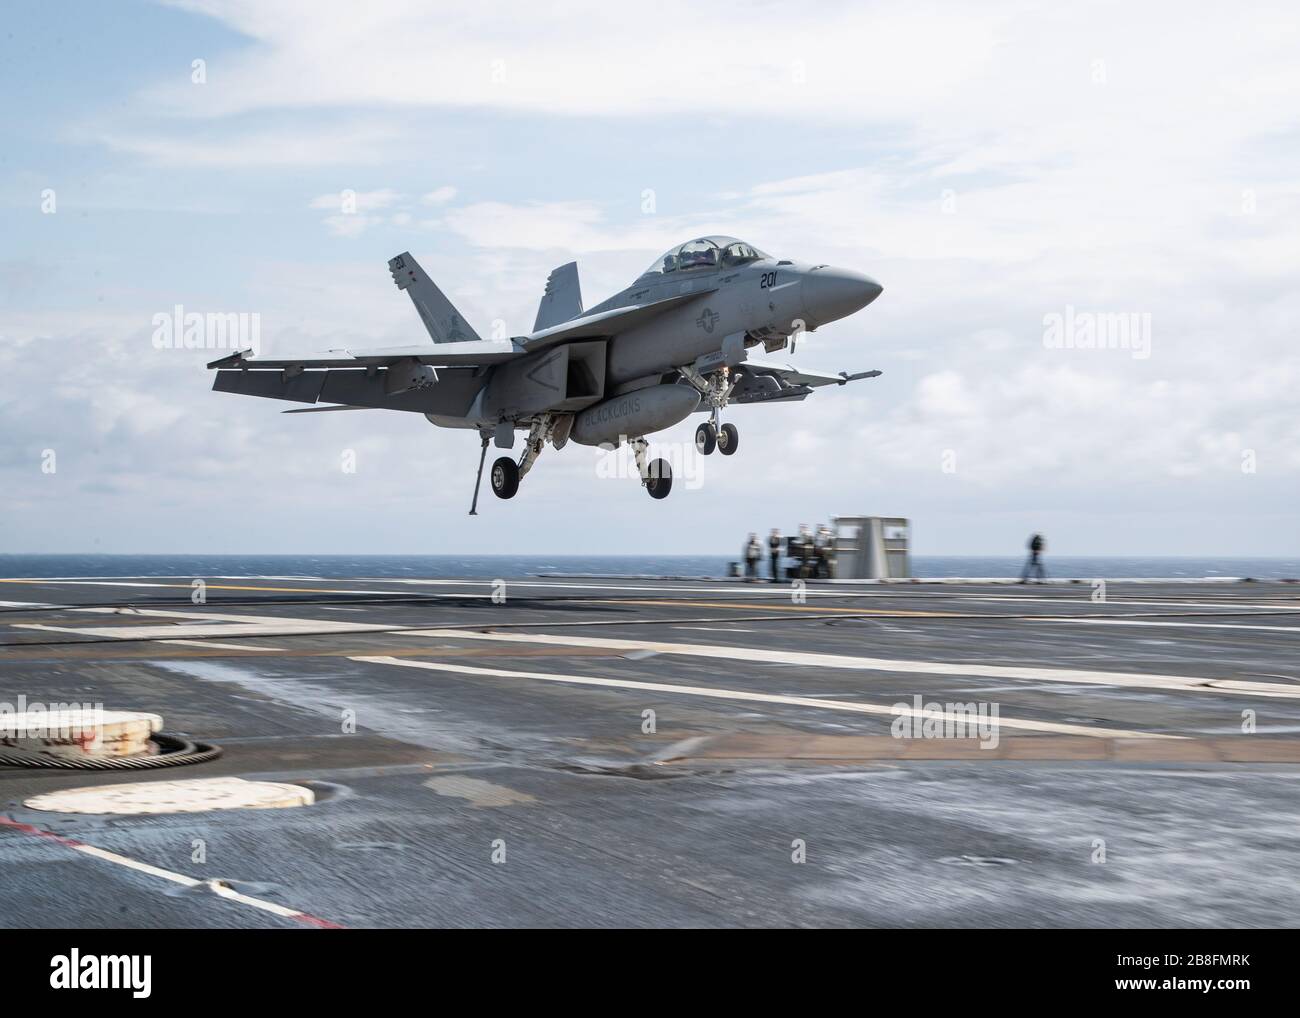 ATLANTIC OCEAN (March 19, 2020) An F/A-18F Super Hornet, attached to 'Black Lions' of Strike Fighter Squadron (VFA) 213, lands on USS Gerald R. Ford's (CVN 78) flight deck during flight operations. Ford is currently underway conducting its flight deck and combat air traffic control center certifications. (U.S. Navy photo by Mass Communication Specialist 3rd Class Zachary Melvin) Stock Photo